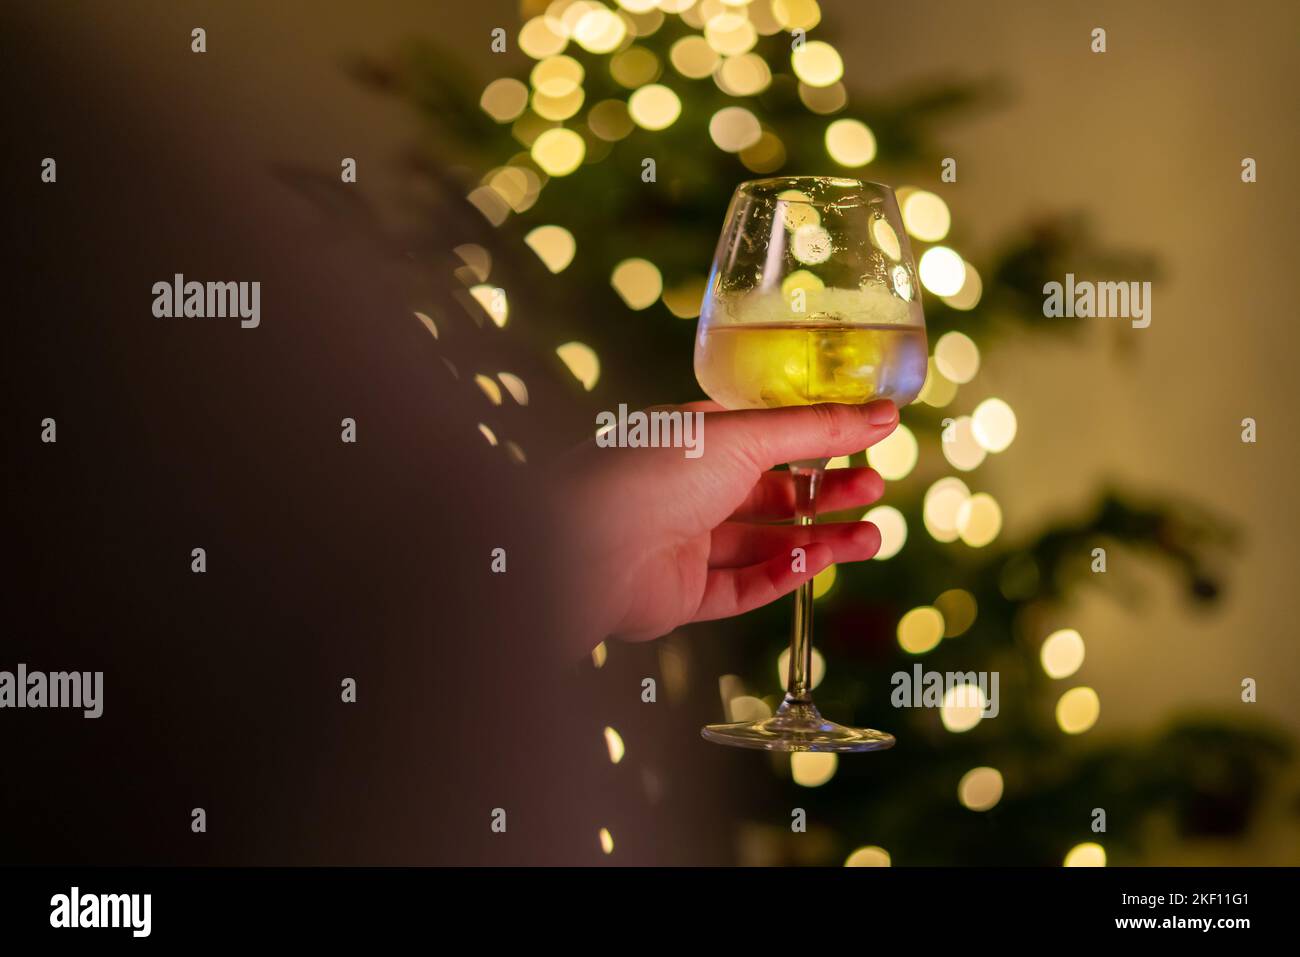 https://c8.alamy.com/comp/2KF11G1/hand-holding-glass-of-wine-blurry-christmas-lights-on-the-christmas-tree-in-the-background-pine-tree-decorated-with-shining-garland-person-holding-2KF11G1.jpg